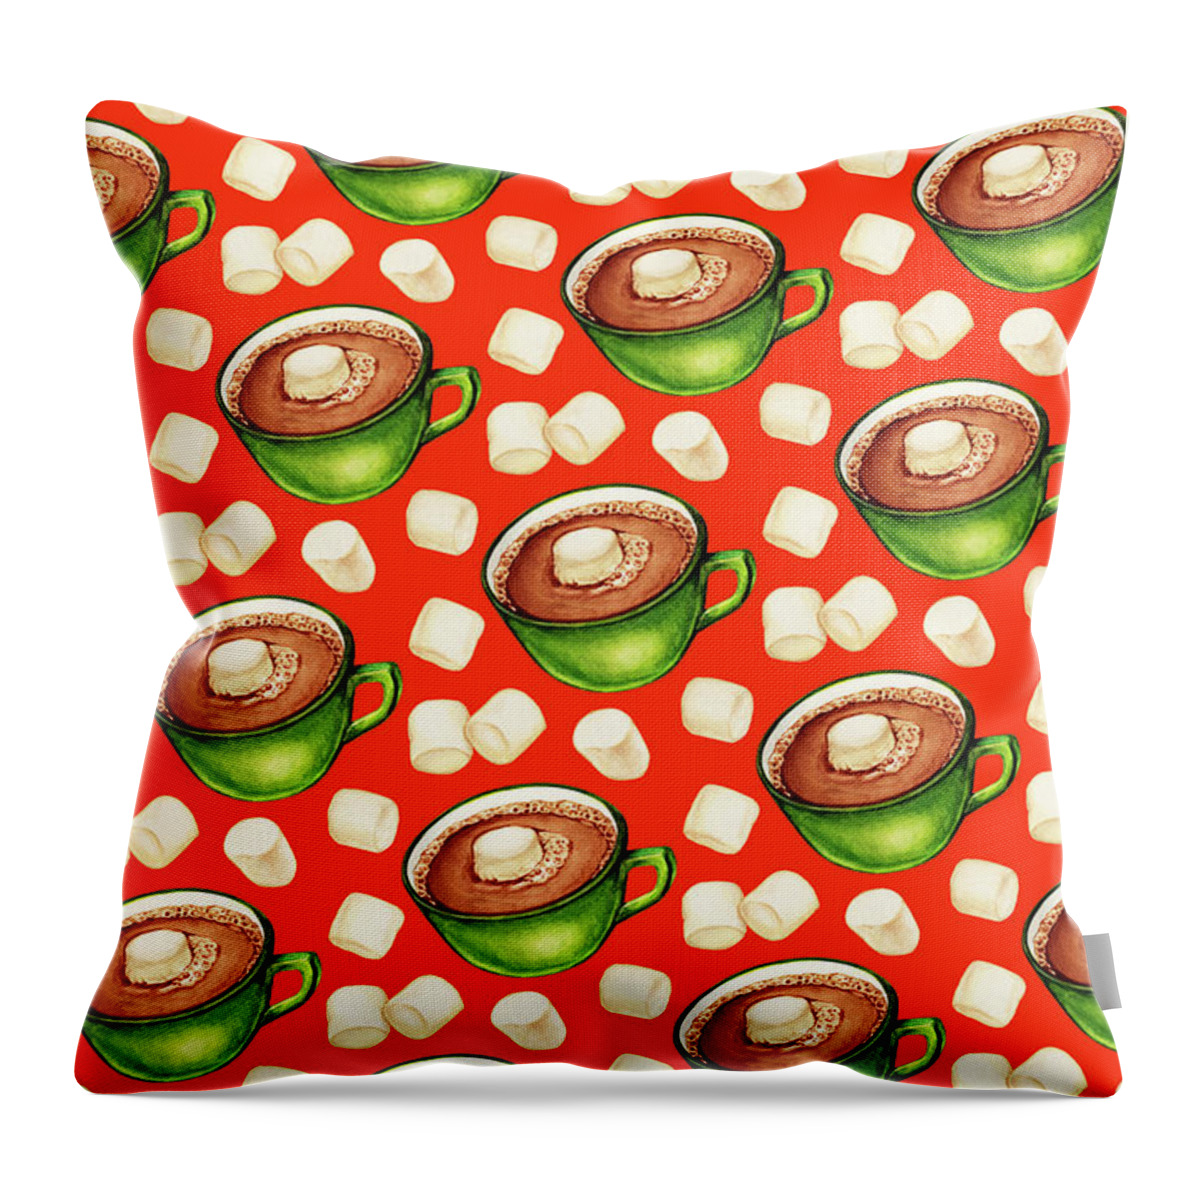 Hot Throw Pillow featuring the painting Hot Cocoa Pattern by Kelly Gilleran